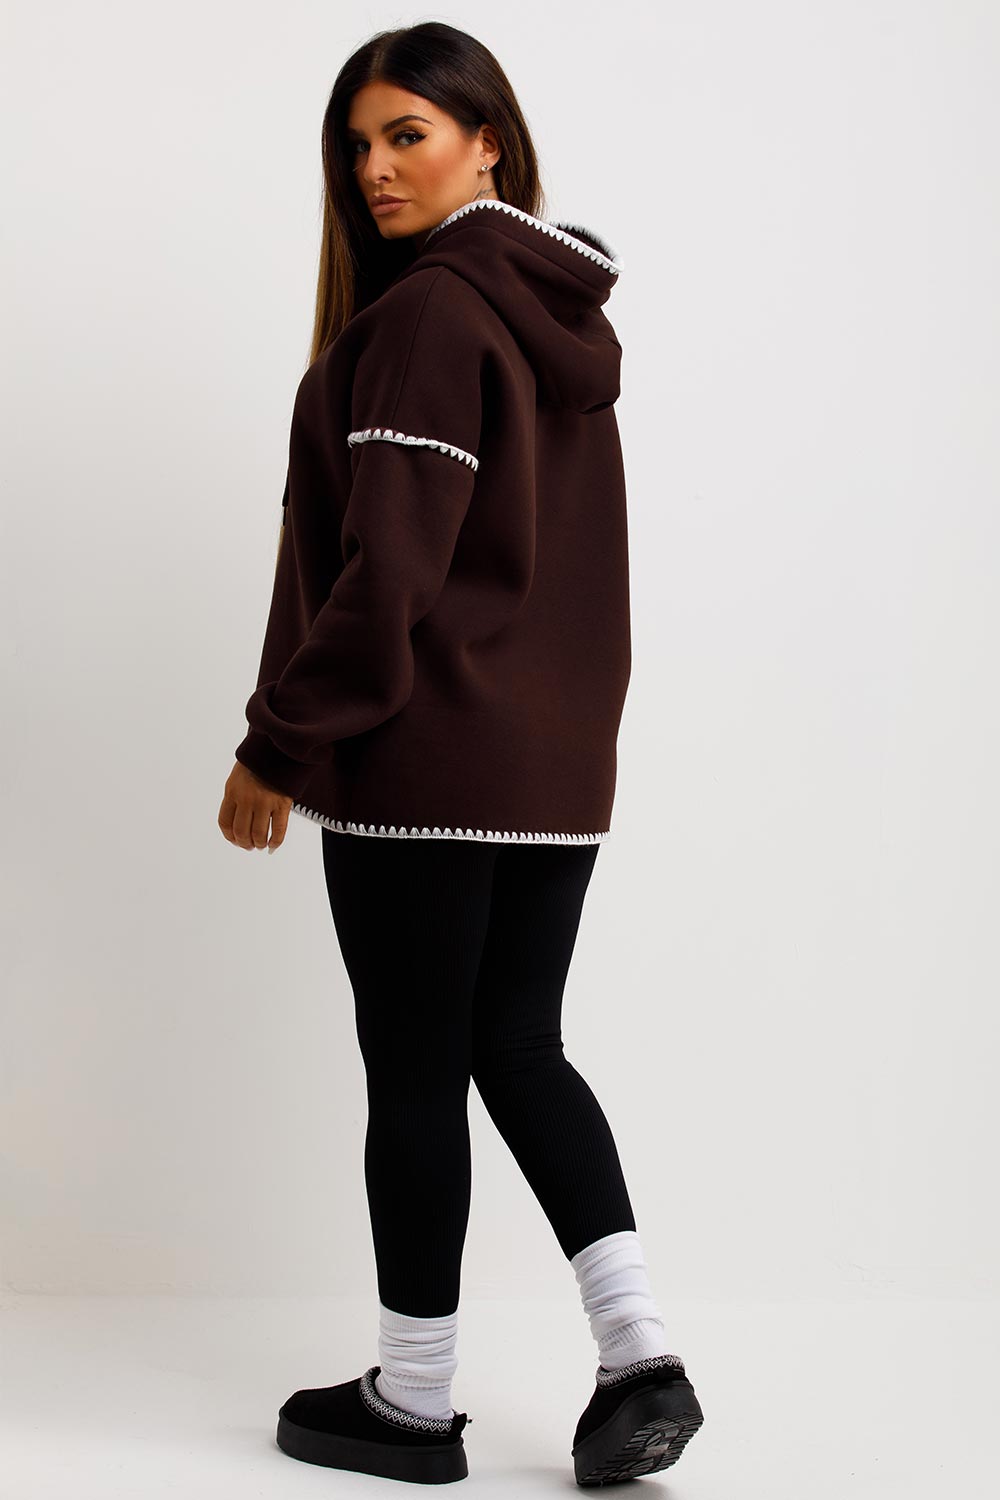 womens oversized sweatshirt with contrast stitches